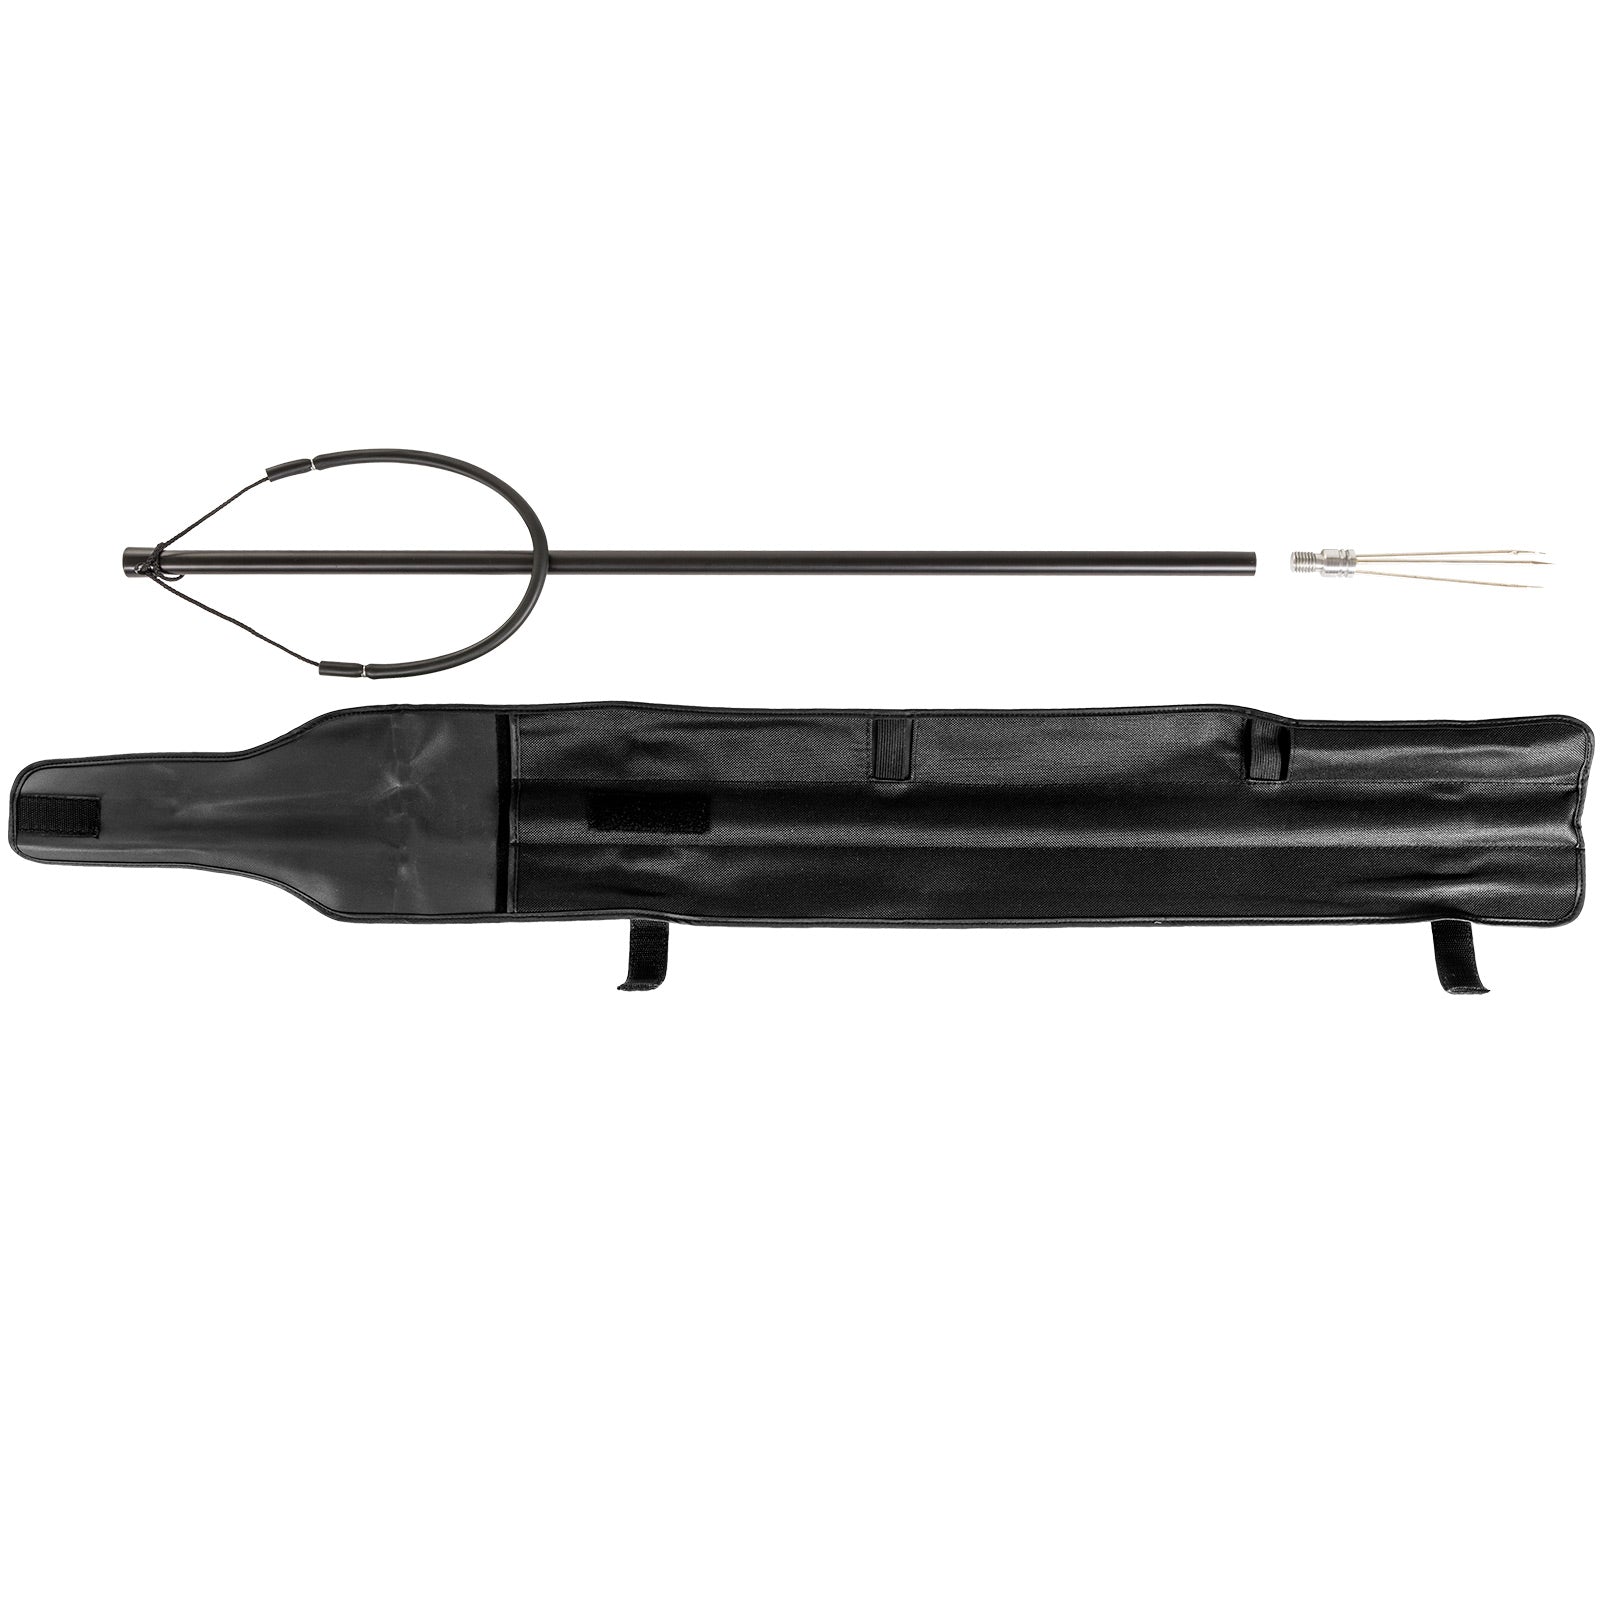 fishing hand spear, fishing hand spear Suppliers and Manufacturers at